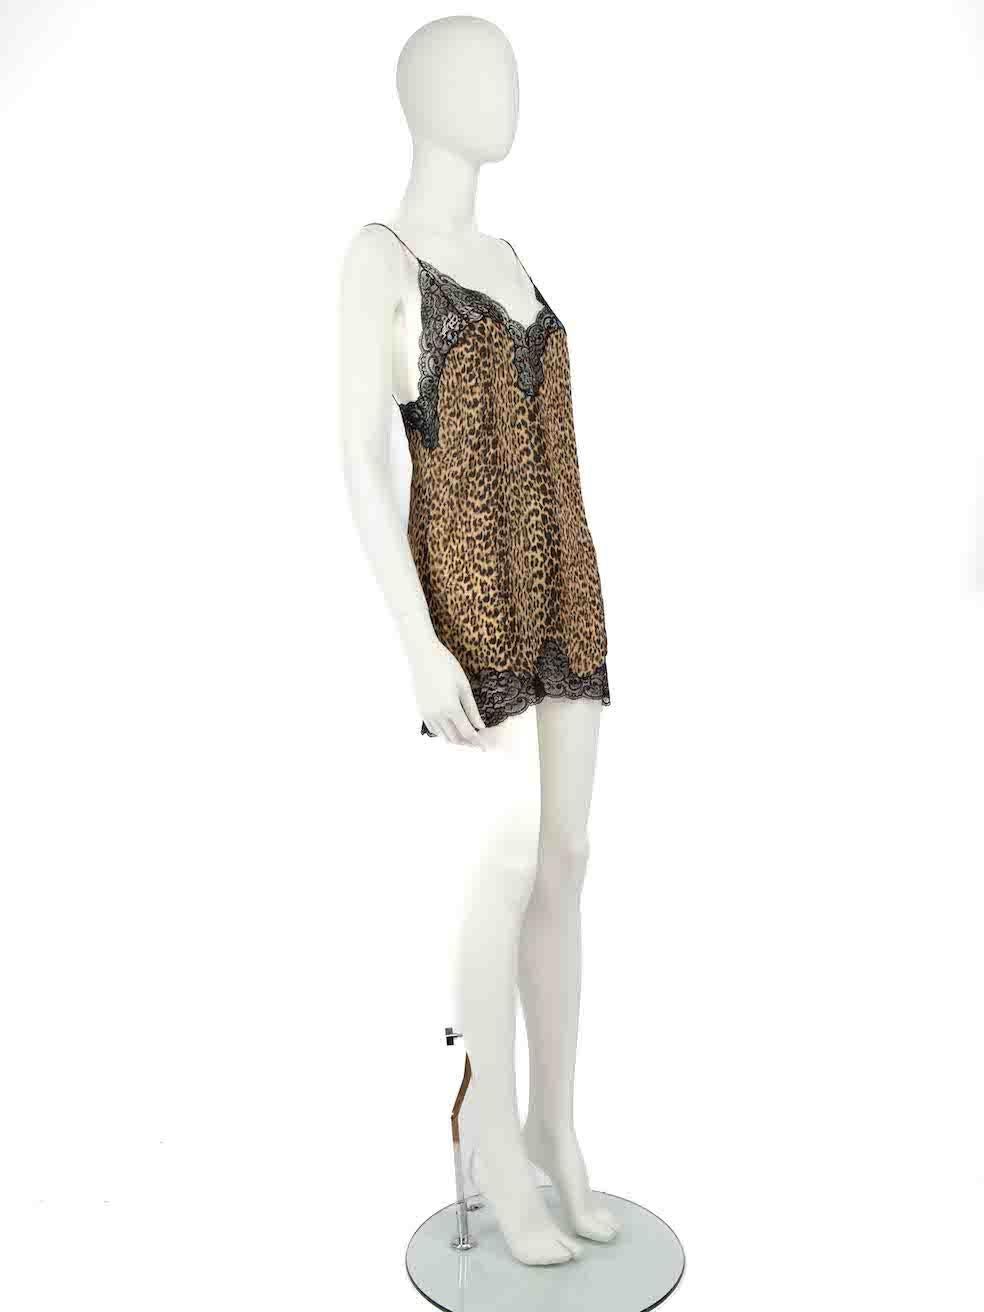 CONDITION is Never worn, with tags. No visible wear to dress is evident on this new Saint Laurent designer resale item.
 
 Details
 Brown
 Silk
 Slip dress
 Leopard print
 Mini
 Sleeveless
 V-neck
 Lace trim
 
 
 Made in France
 
 Composition
 100%